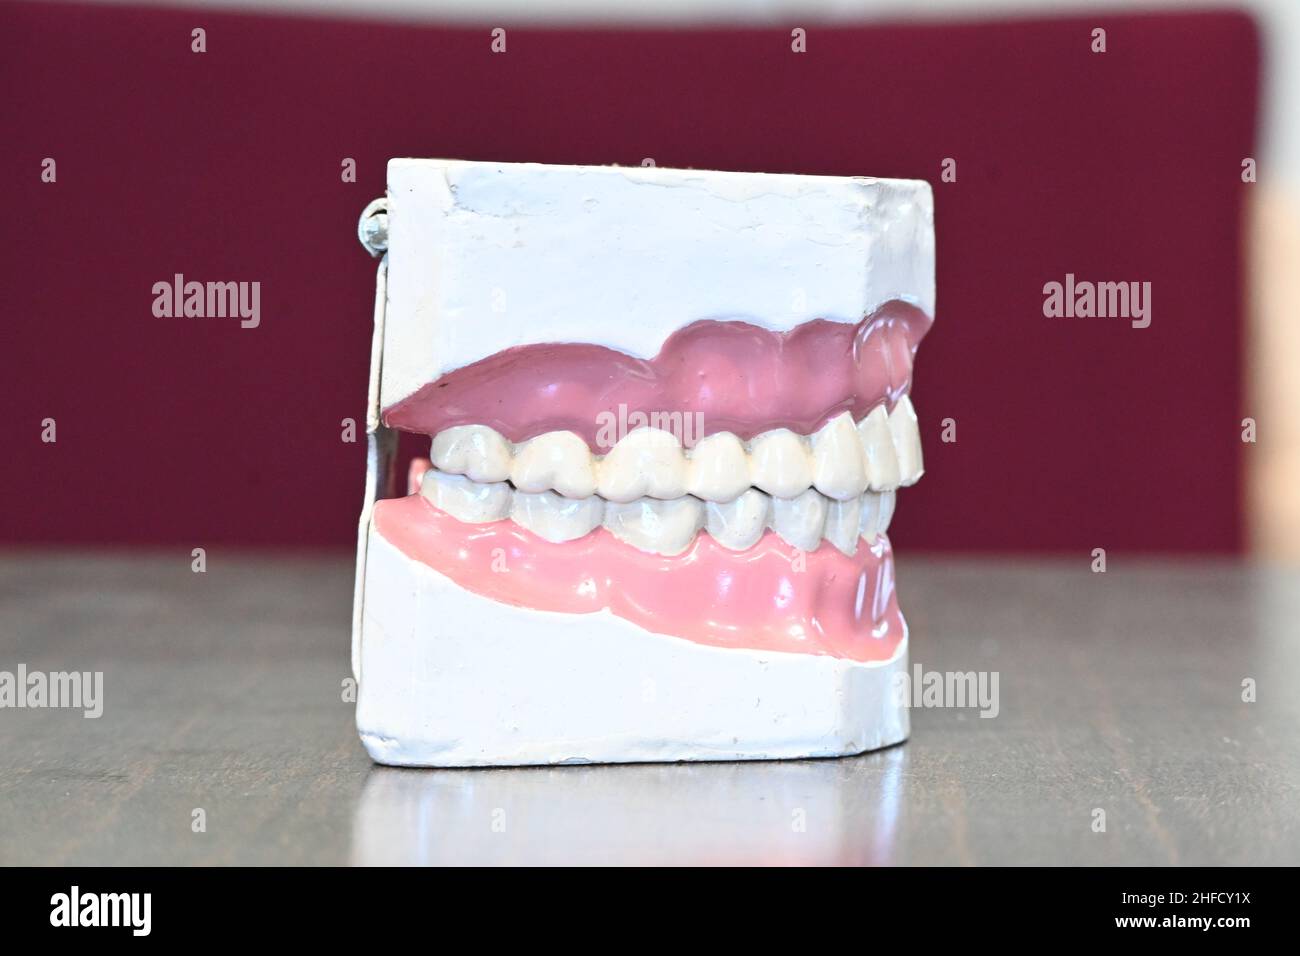 Sideline(Lateral) View of dental model Stock Photo